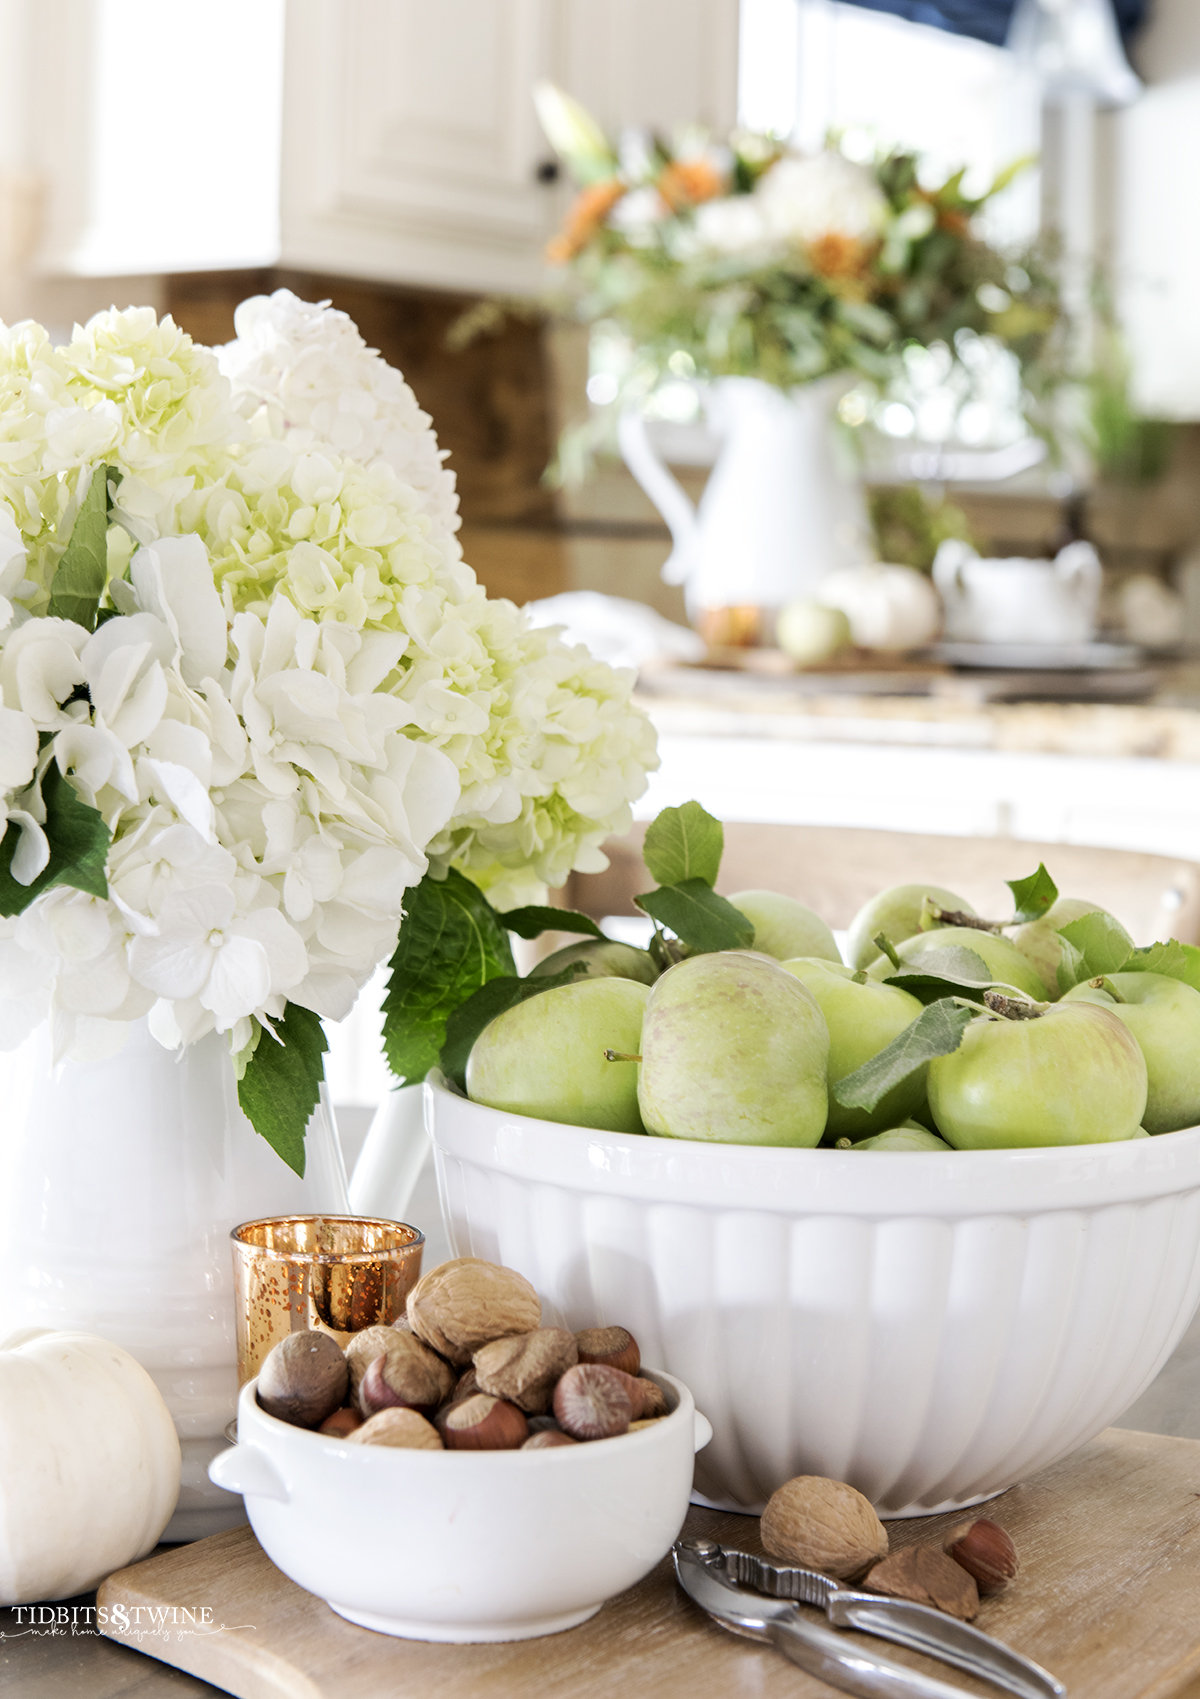 bowl of green apples next to bowl of nuts and white pitcher of white hydrangeas on kitchen table with fall flowers in background